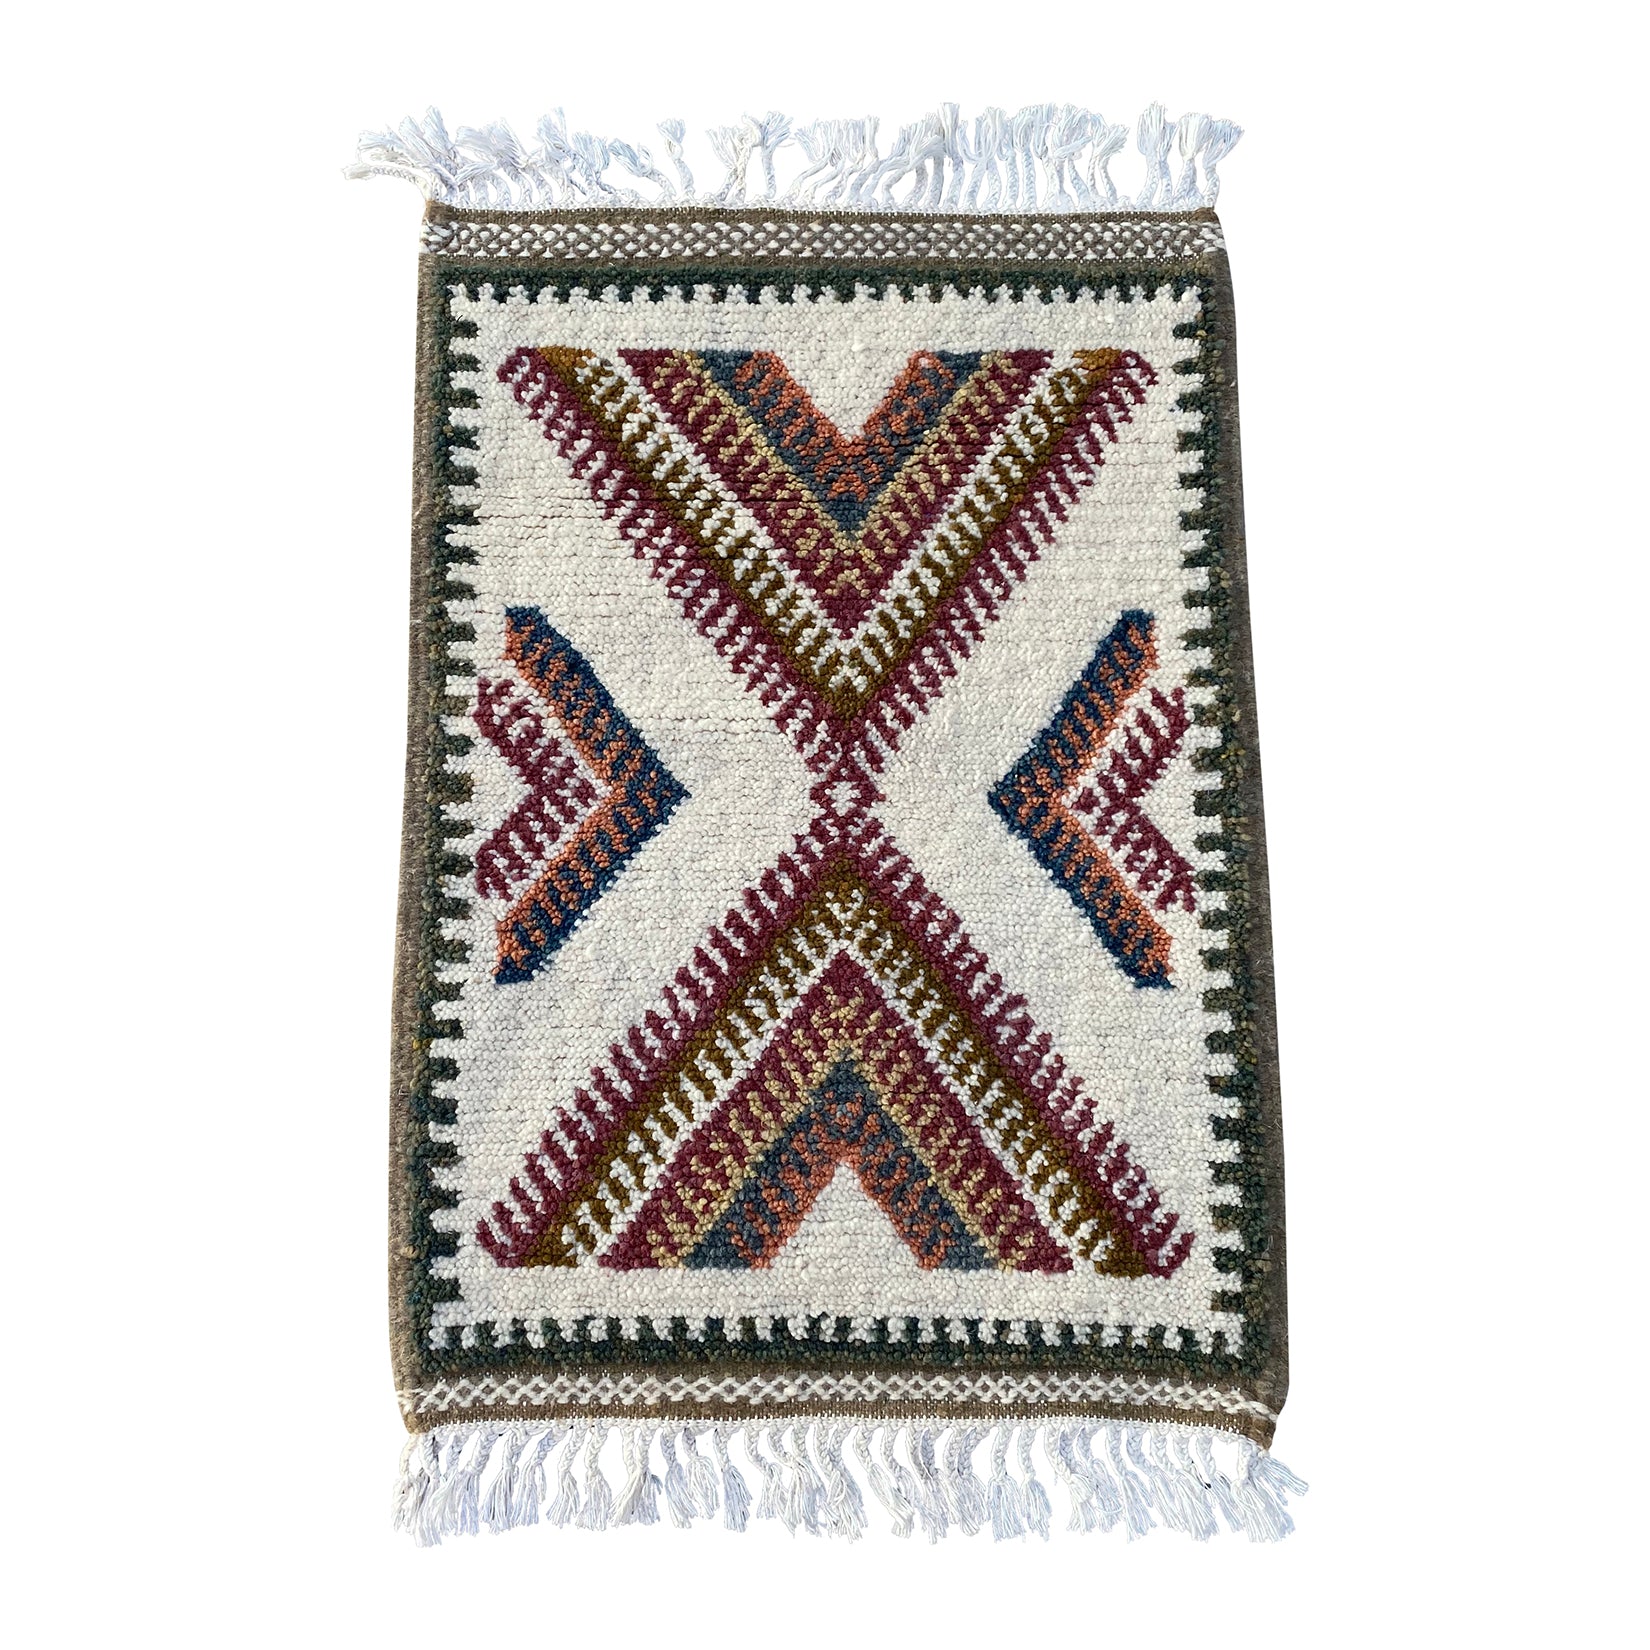  Unique Moroccan throw rug with geometric pattern design - Kantara | Moroccan Rugs